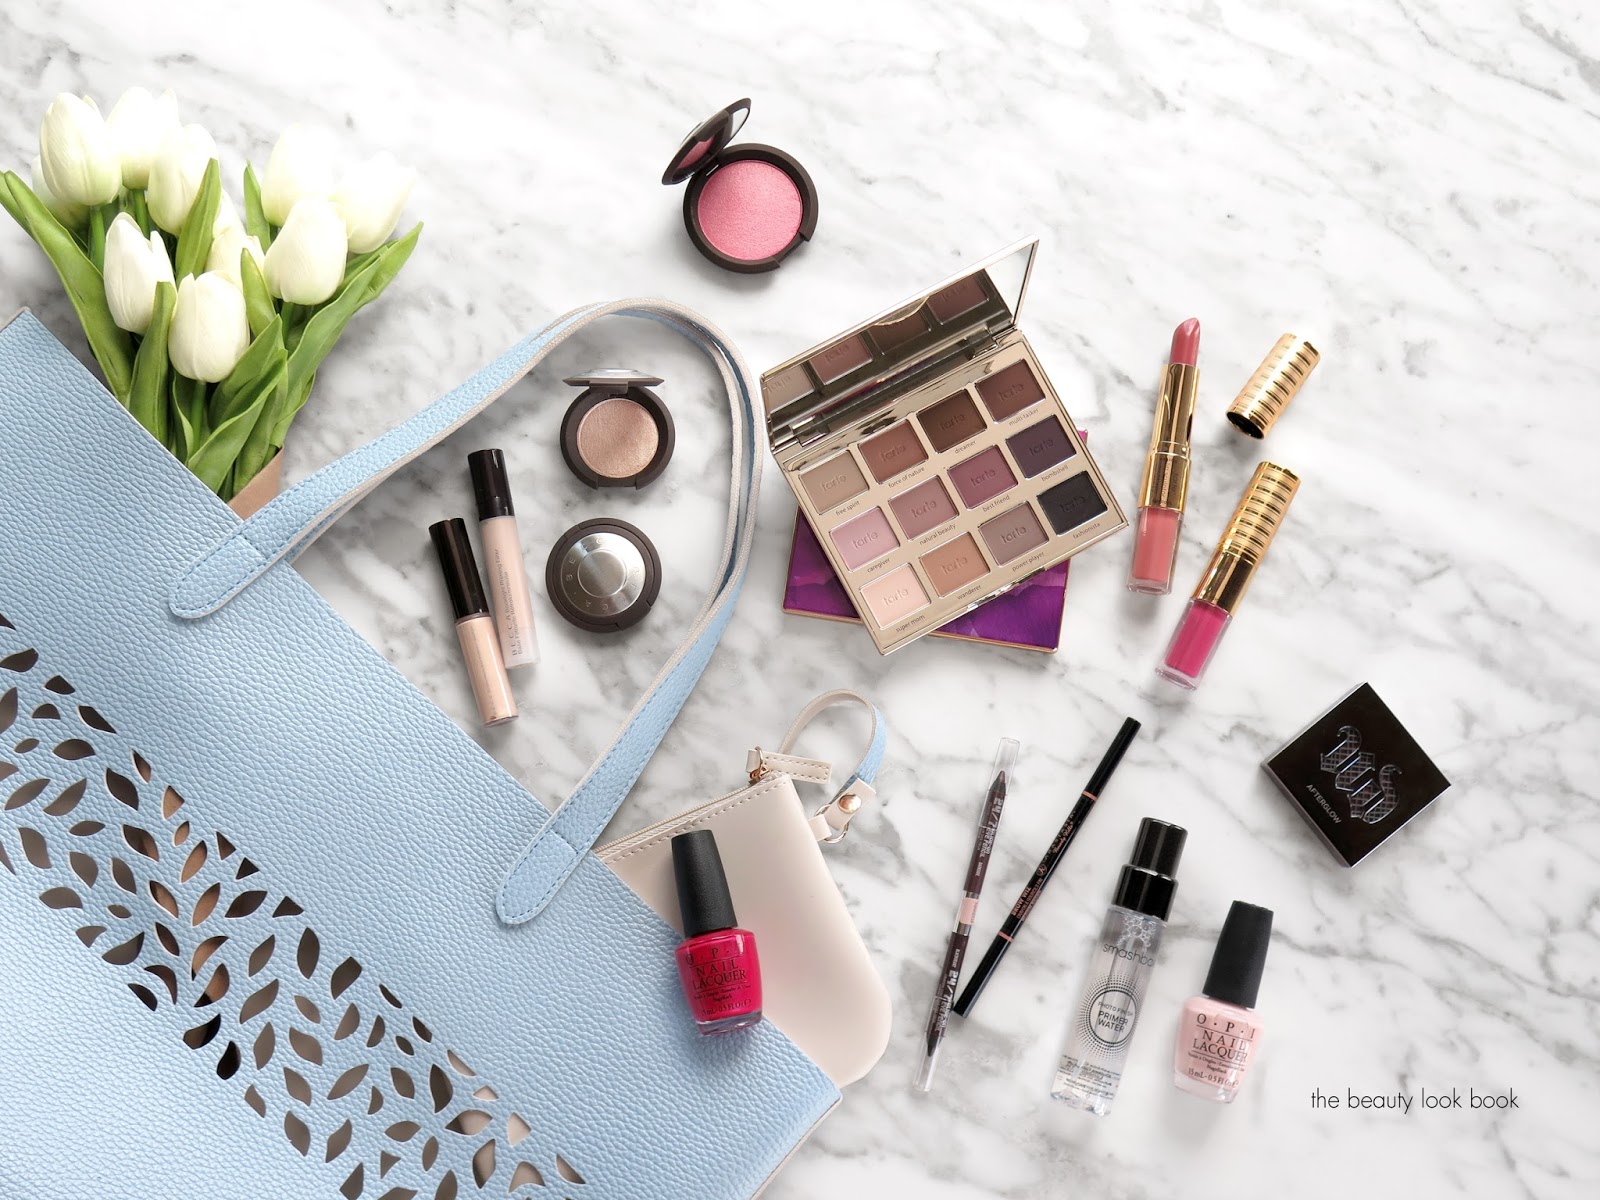 Luxury Beauty Gift Ideas for Mother's Day - The Beauty Look Book